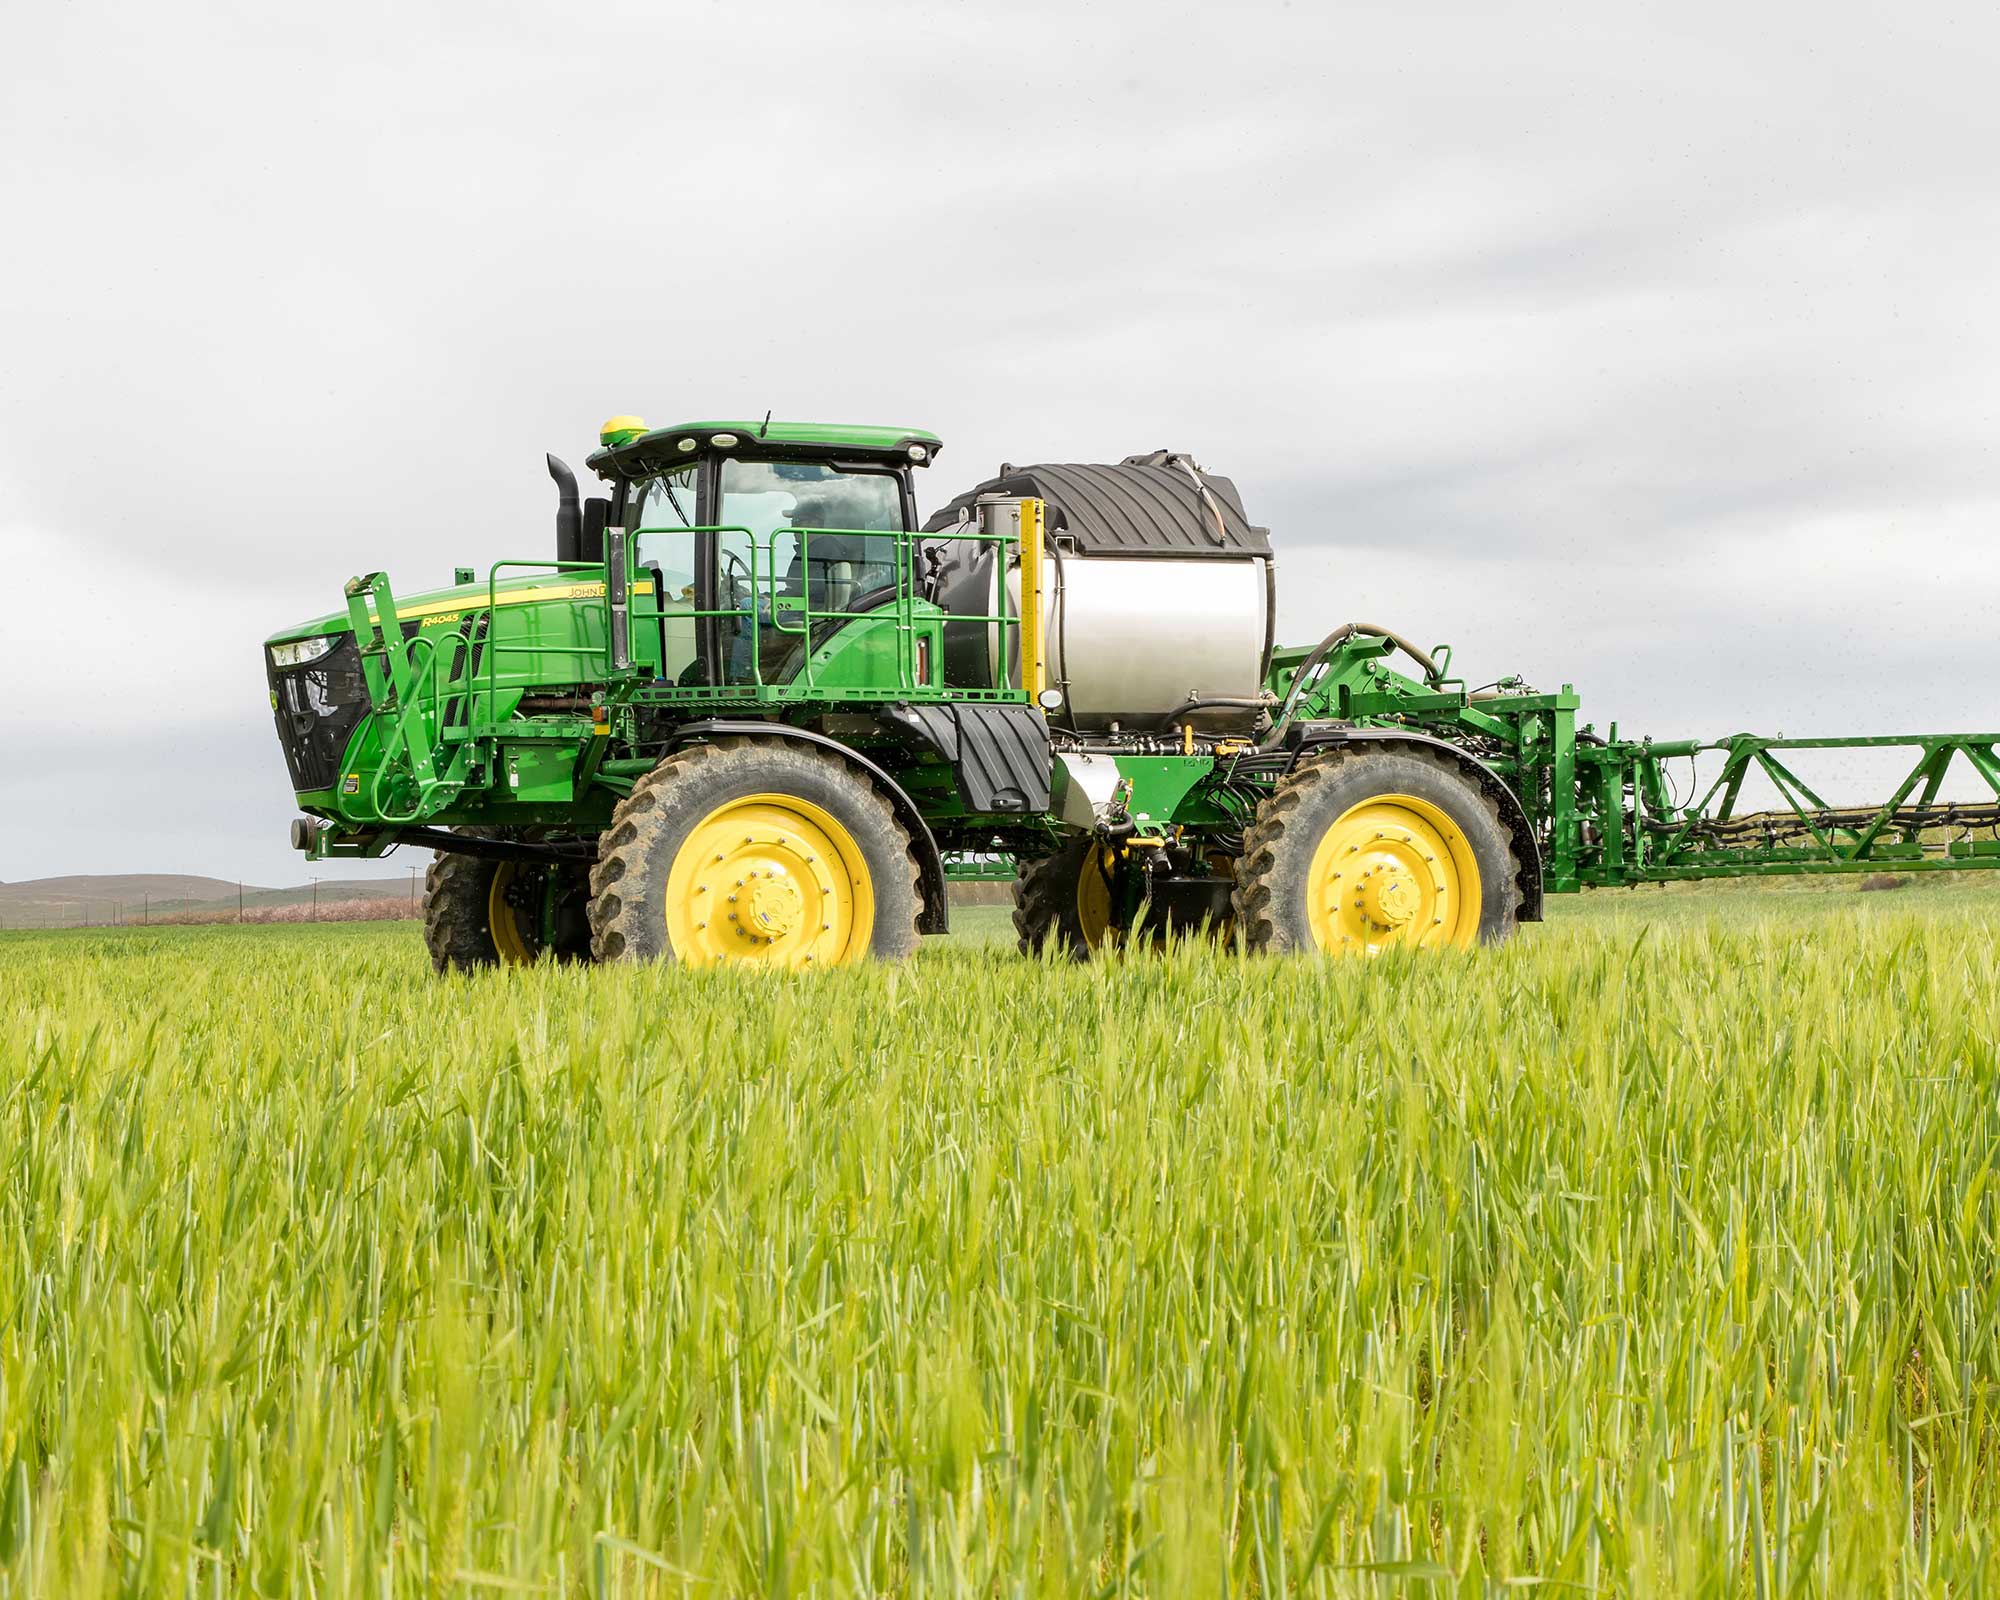 John Deere unveils updates to sprayers for 2020 AGDAILY